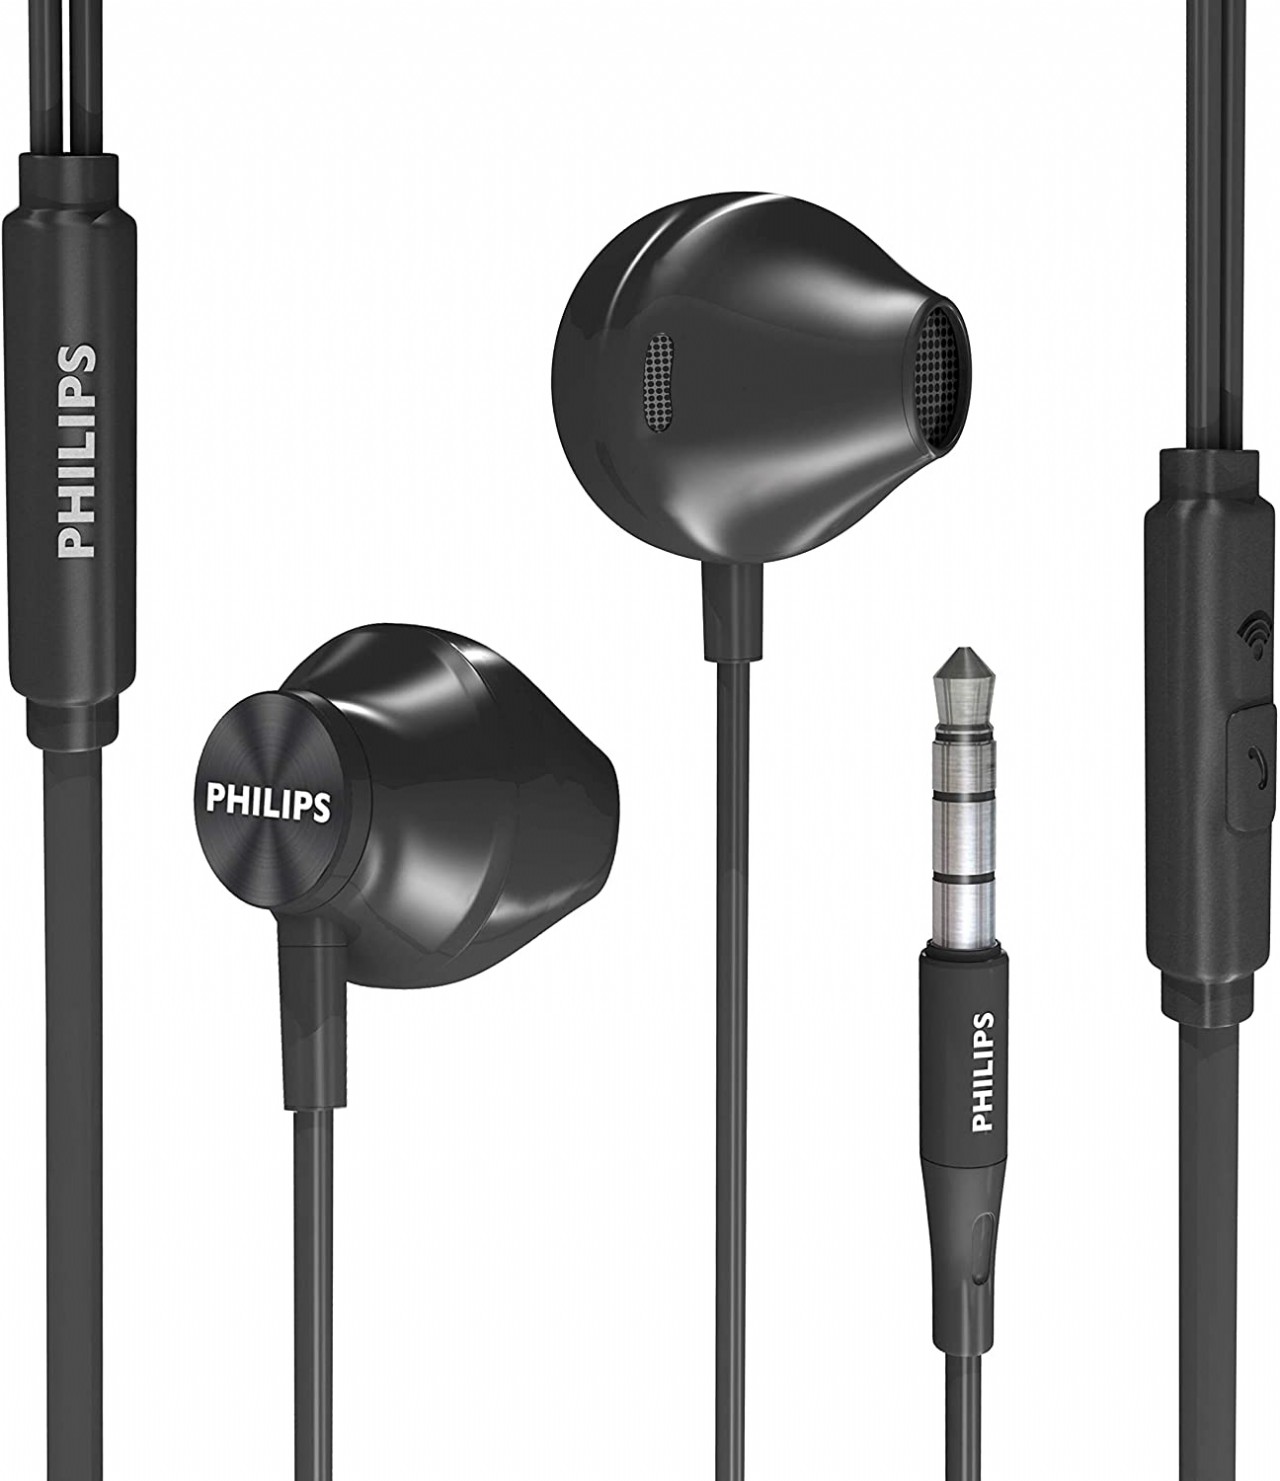 PHILIPS Wired Earbuds with Microphone - Ergonomic Comfort-Fit in Ear Headphones with Mic Cell Phone